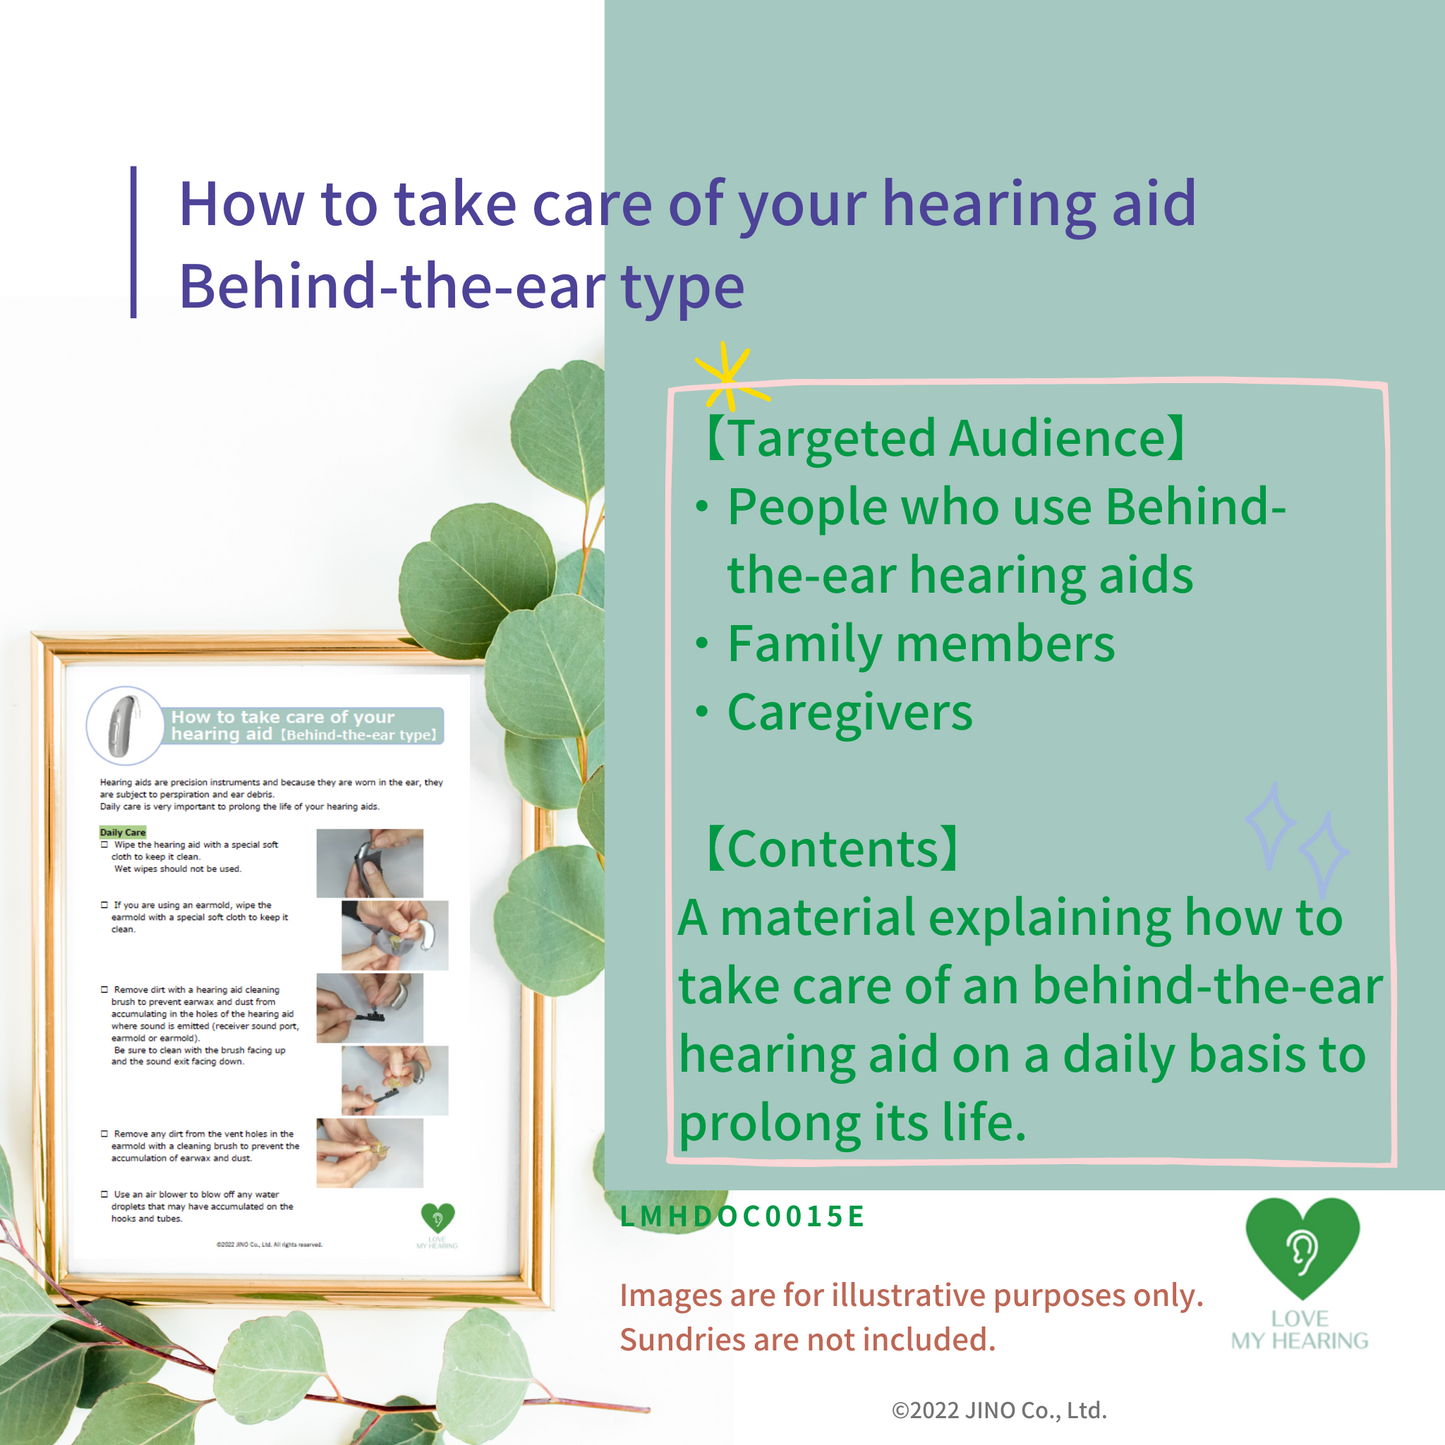 How to take care of your hearing aid【Behind-the-ear type】